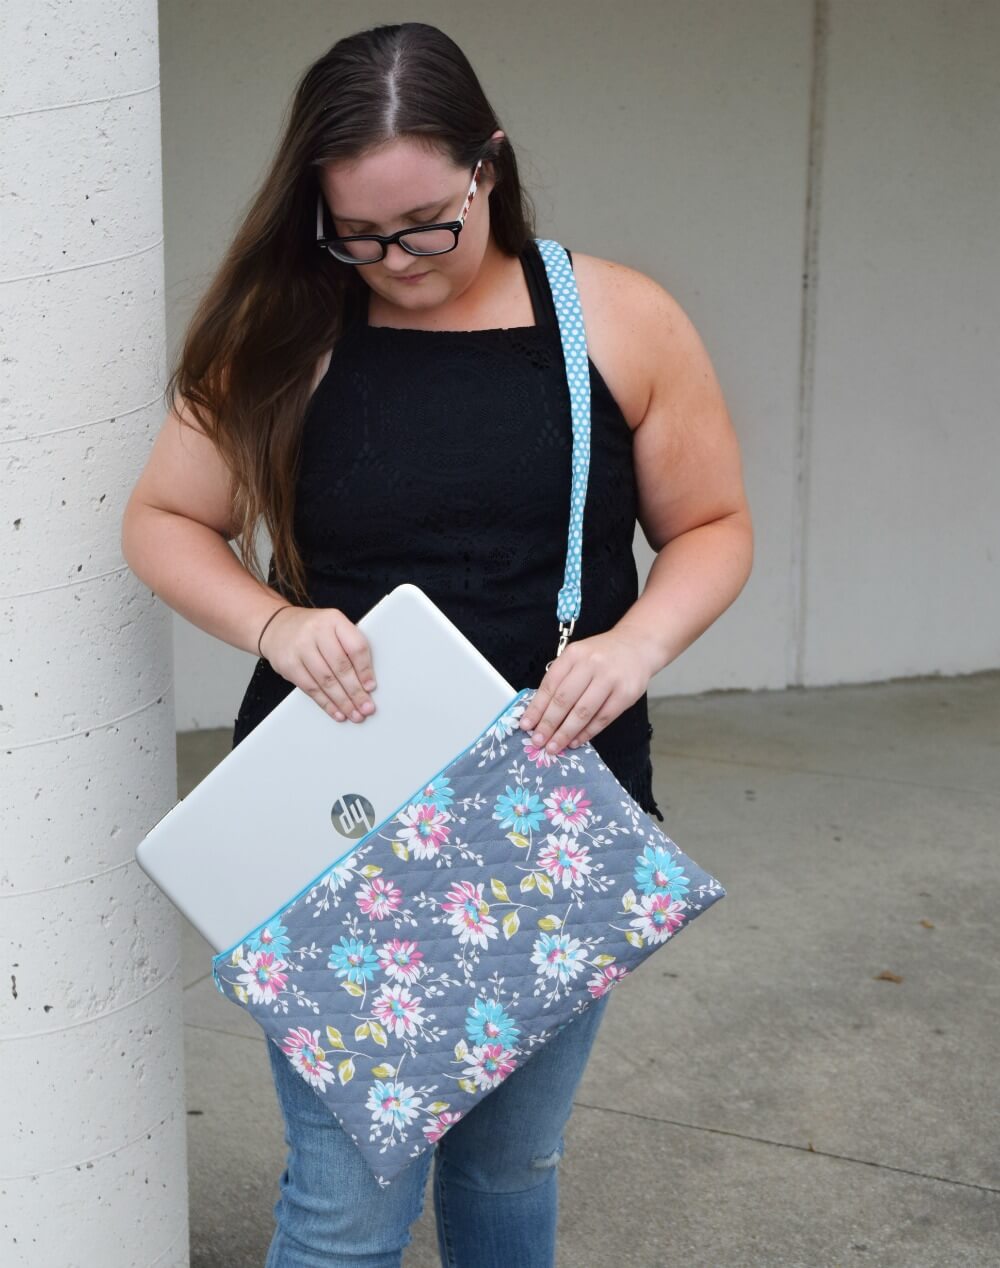 Get #BTSwithHP w/this #easy #DIY Laptop Bag #craft! #ad #backtoschool